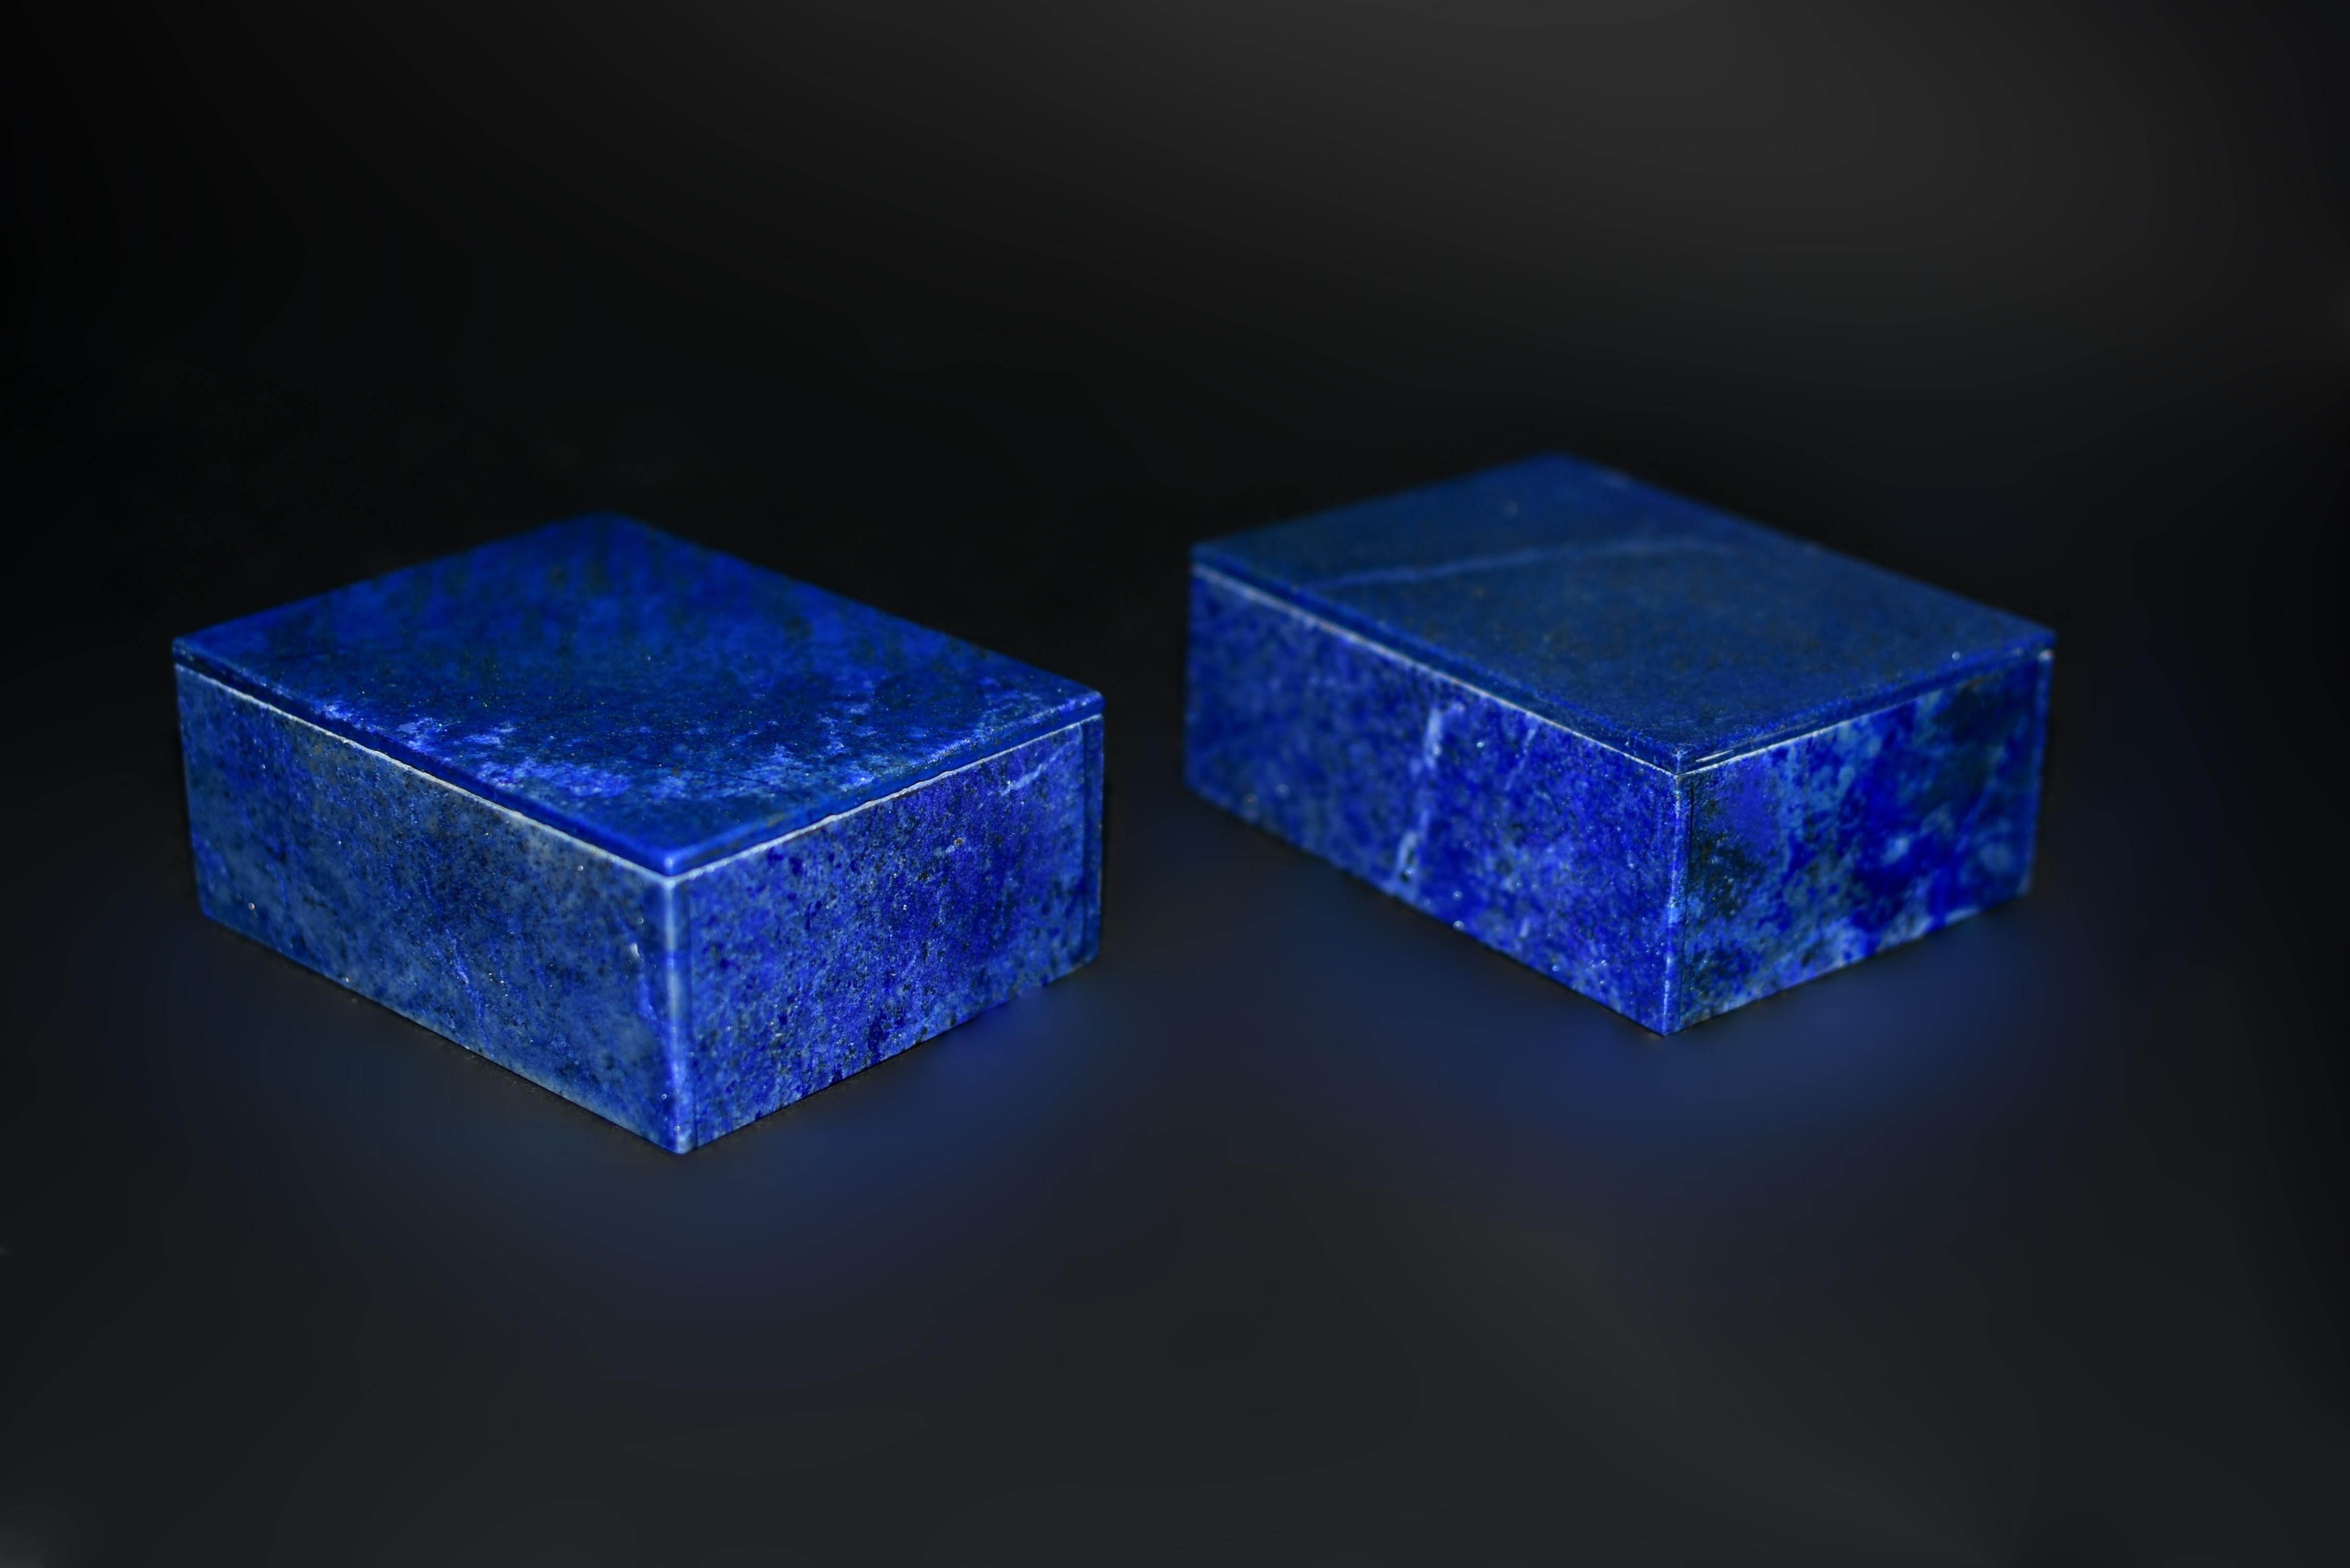 A pair of fine lapis lazuli boxes sourced from the depths of Afghanistan, each exuding an aura of regal splendor with saturated royal blue hue. The beautiful natural inclusions of gold and white, reminiscent of a celestial tapestry of golden shower